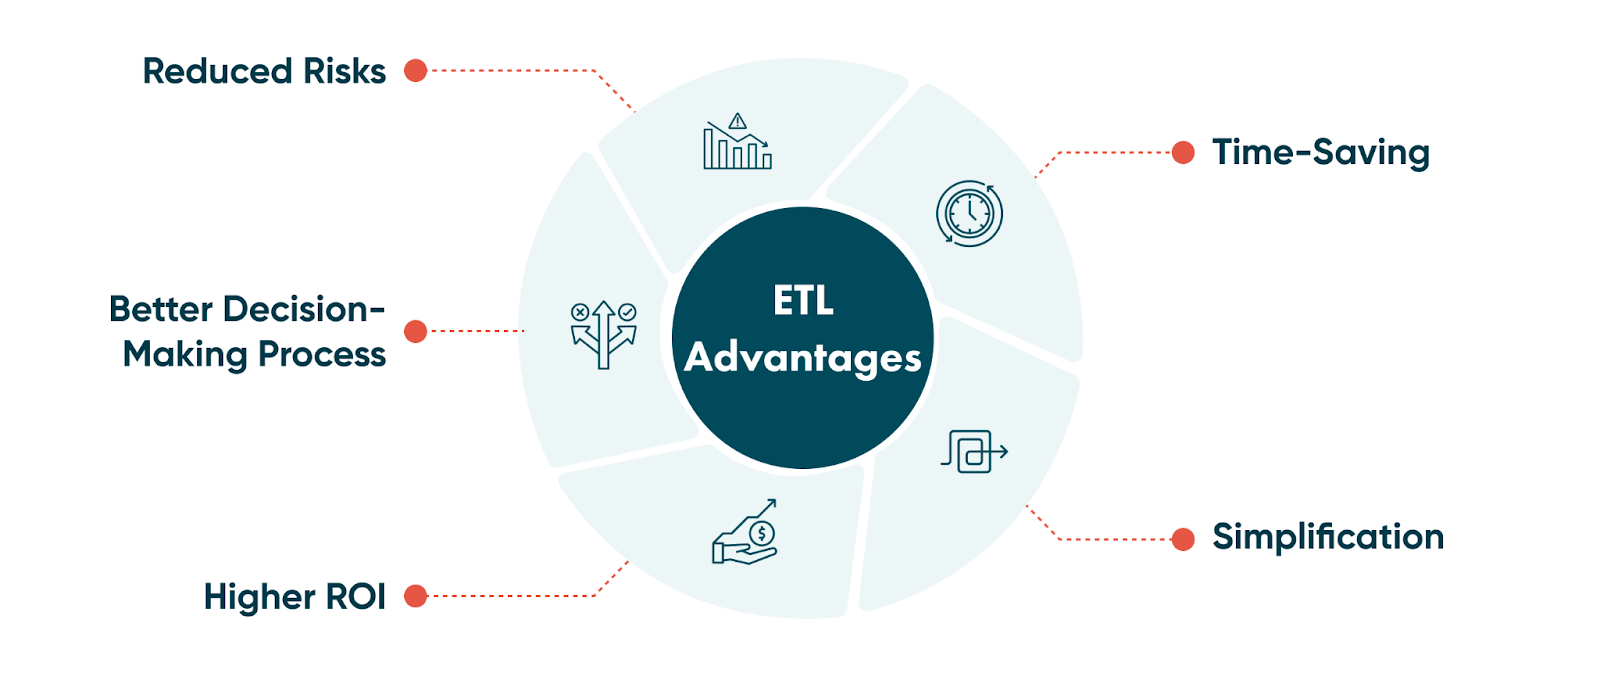 Extract, Transform, and Load — this is the process that enables efficient data management so you can get acquainted with all the benefits of ETL.